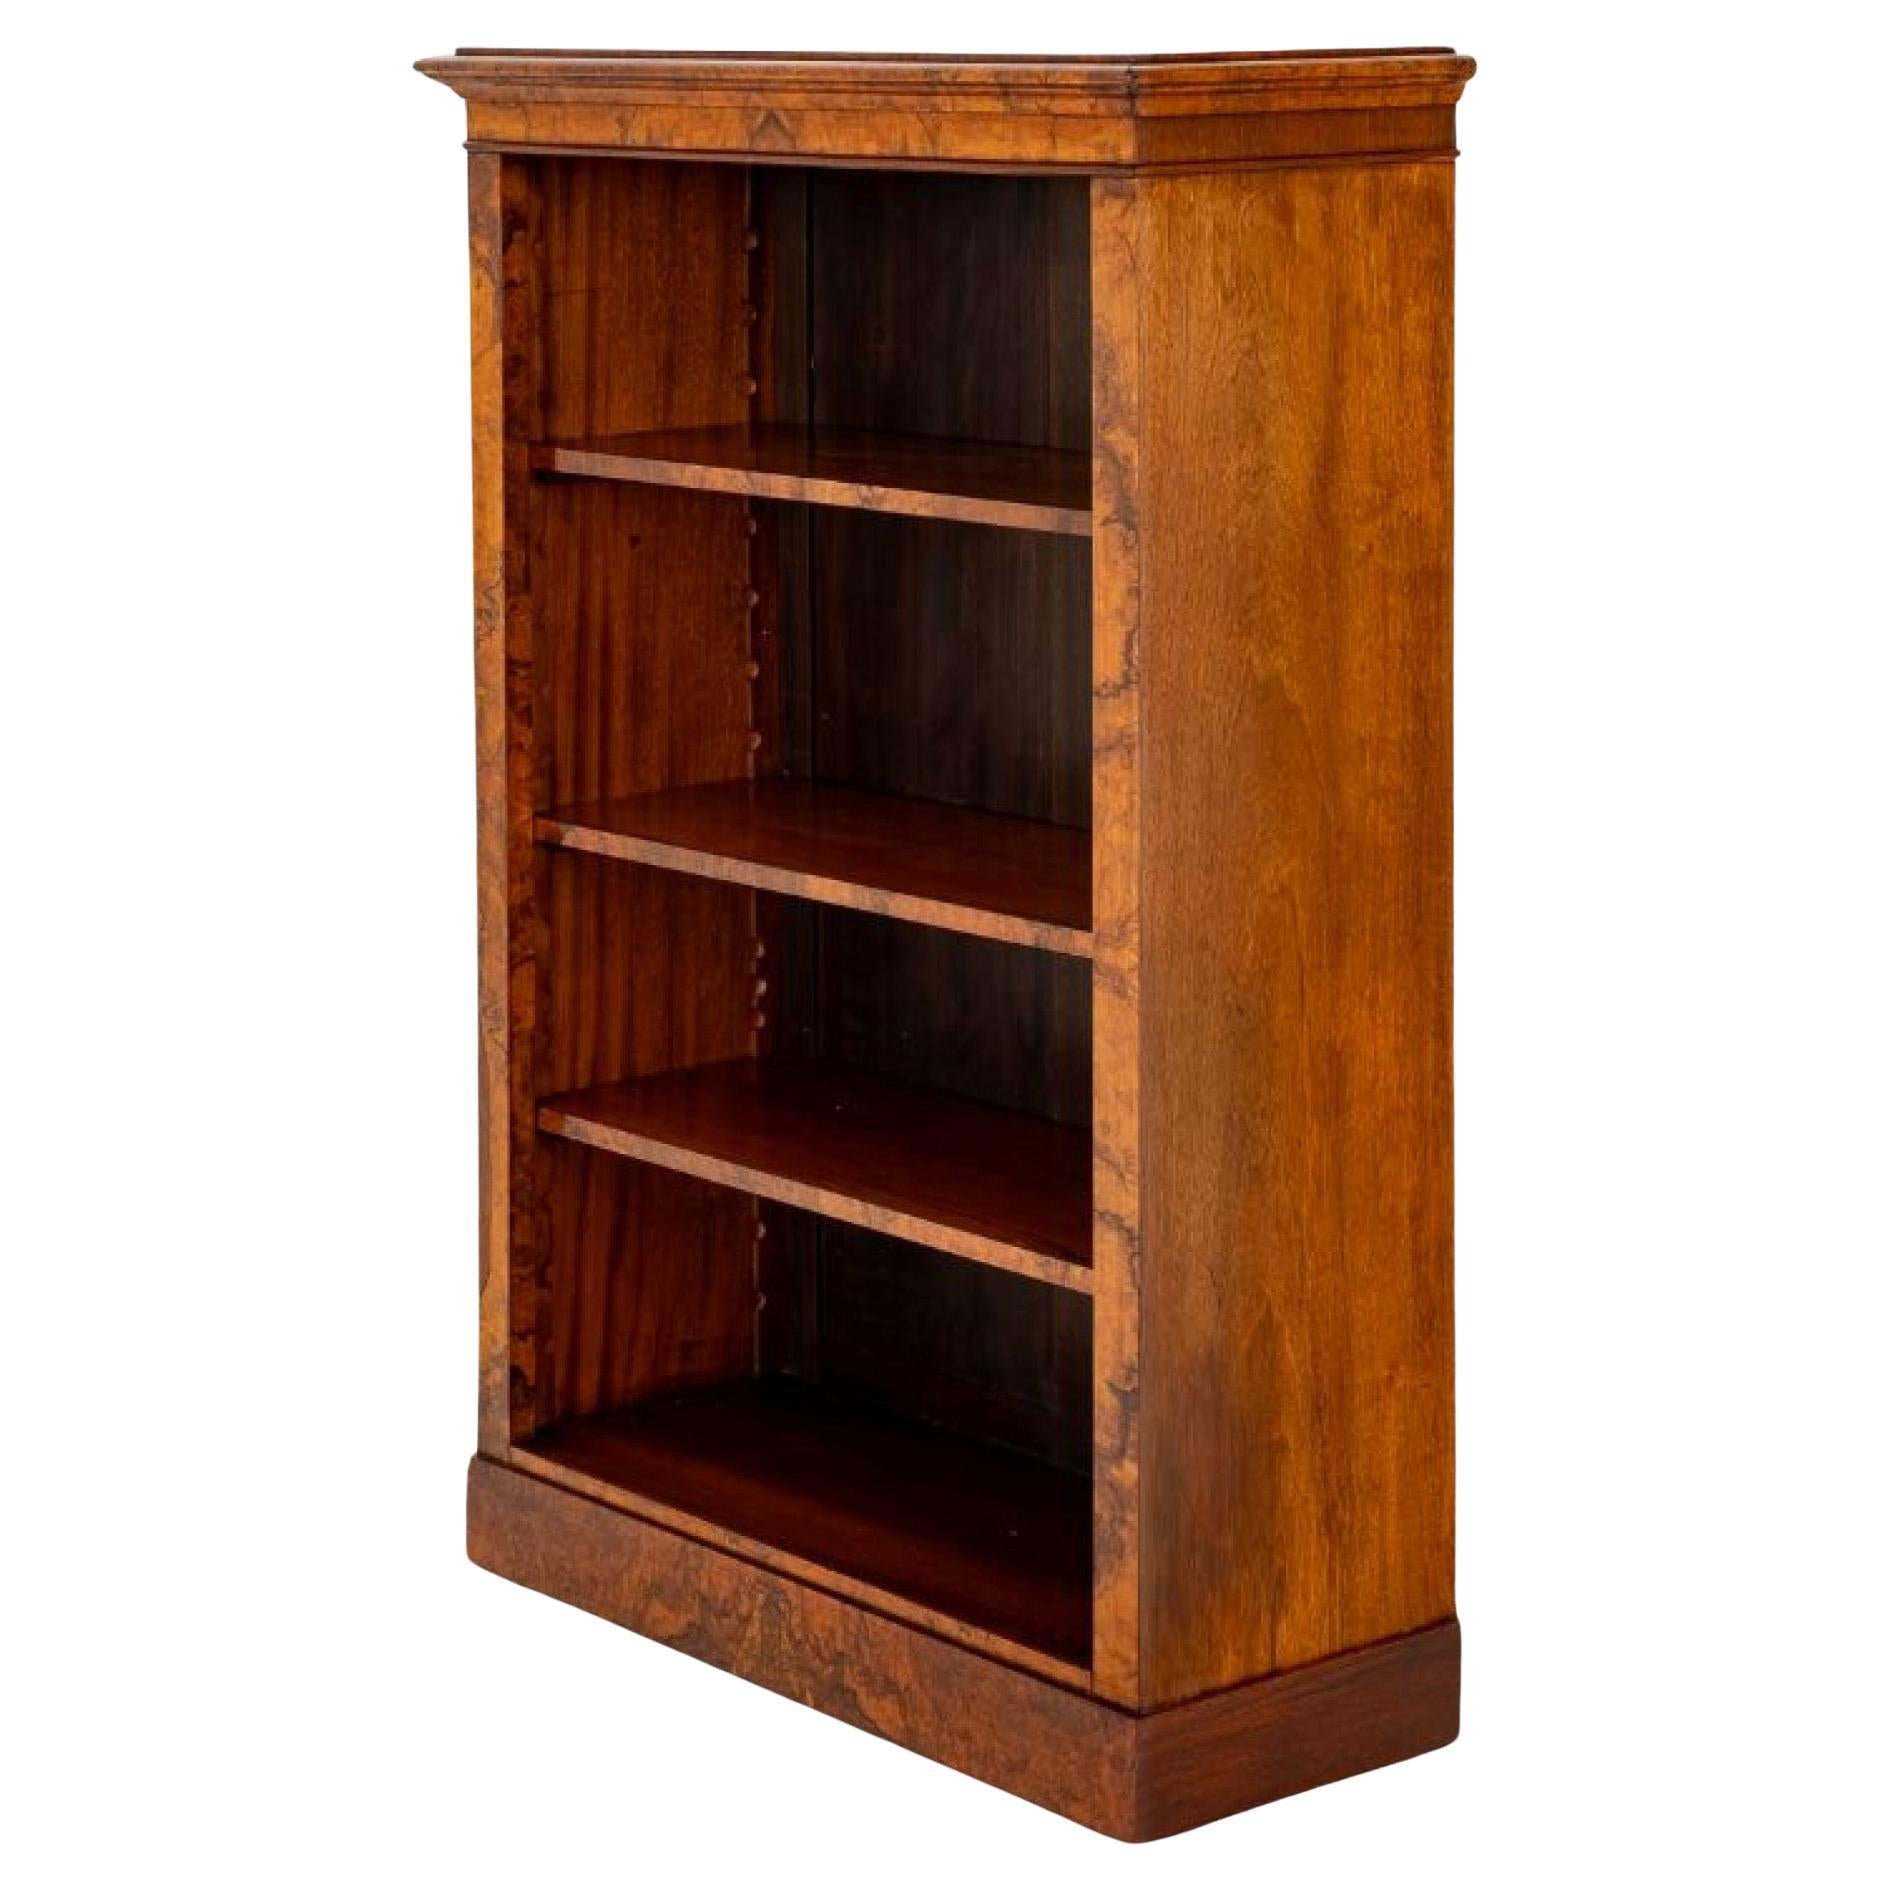 Period Victorian Bookcase Open Front 1860 For Sale